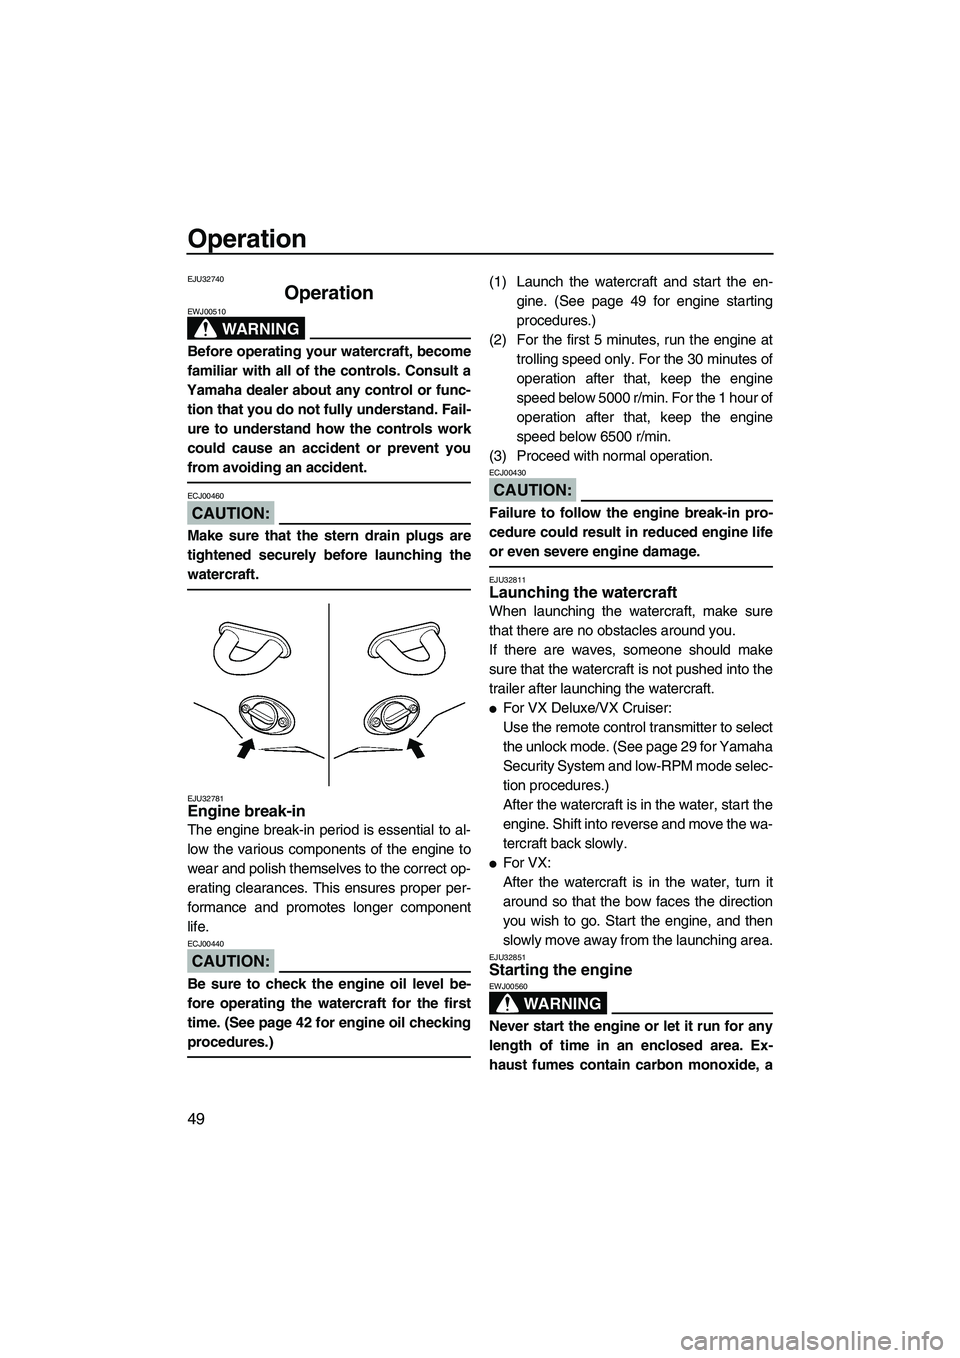 YAMAHA VX 2008  Owners Manual Operation
49
EJU32740
Operation 
WARNING
EWJ00510
Before operating your watercraft, become
familiar with all of the controls. Consult a
Yamaha dealer about any control or func-
tion that you do not fu